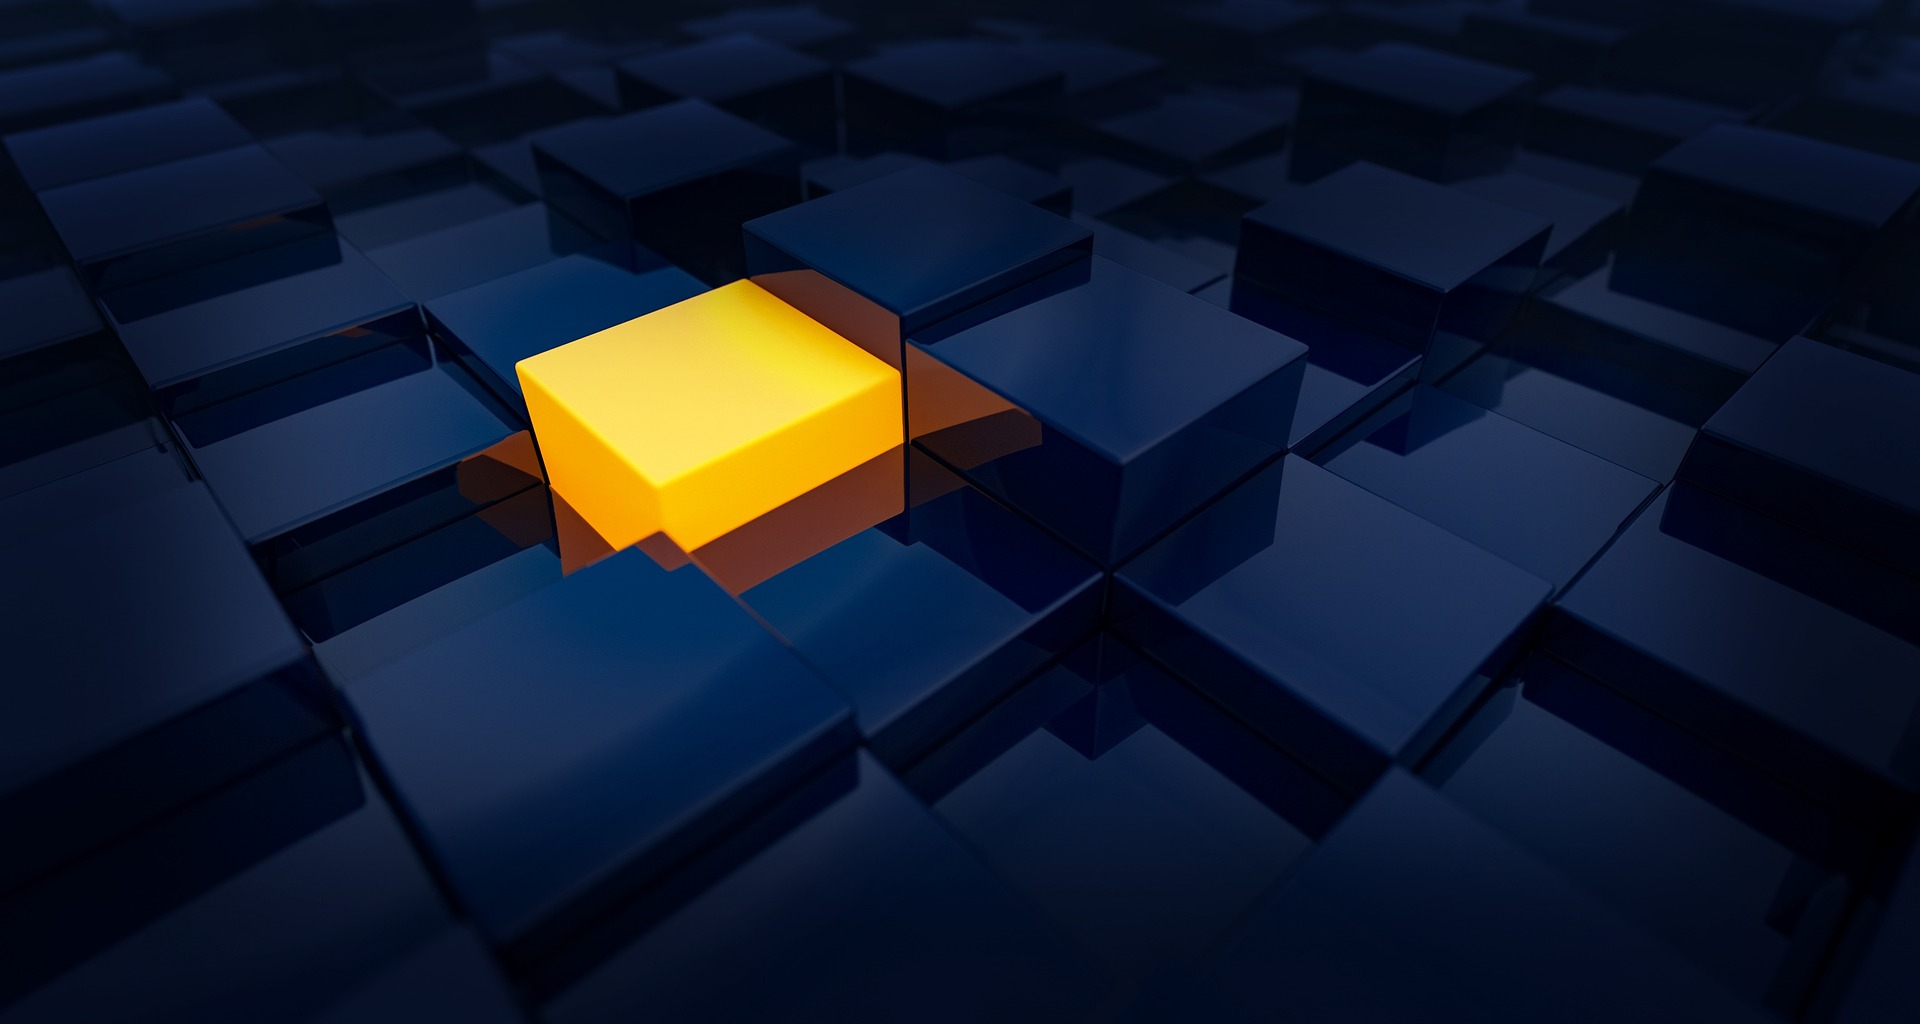 an abstract image of cubes in yellow and blue